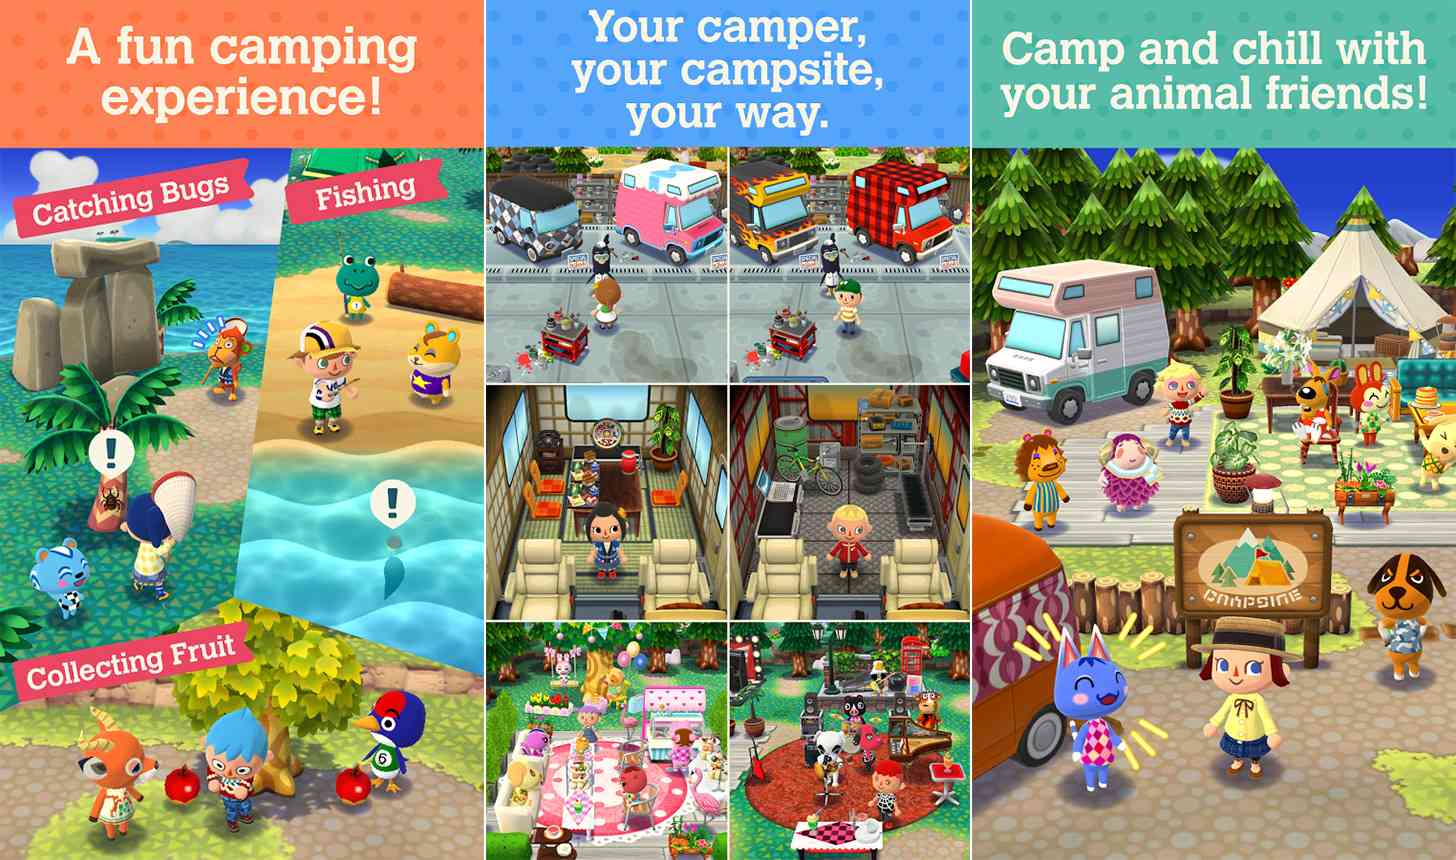  Pocket Camp features